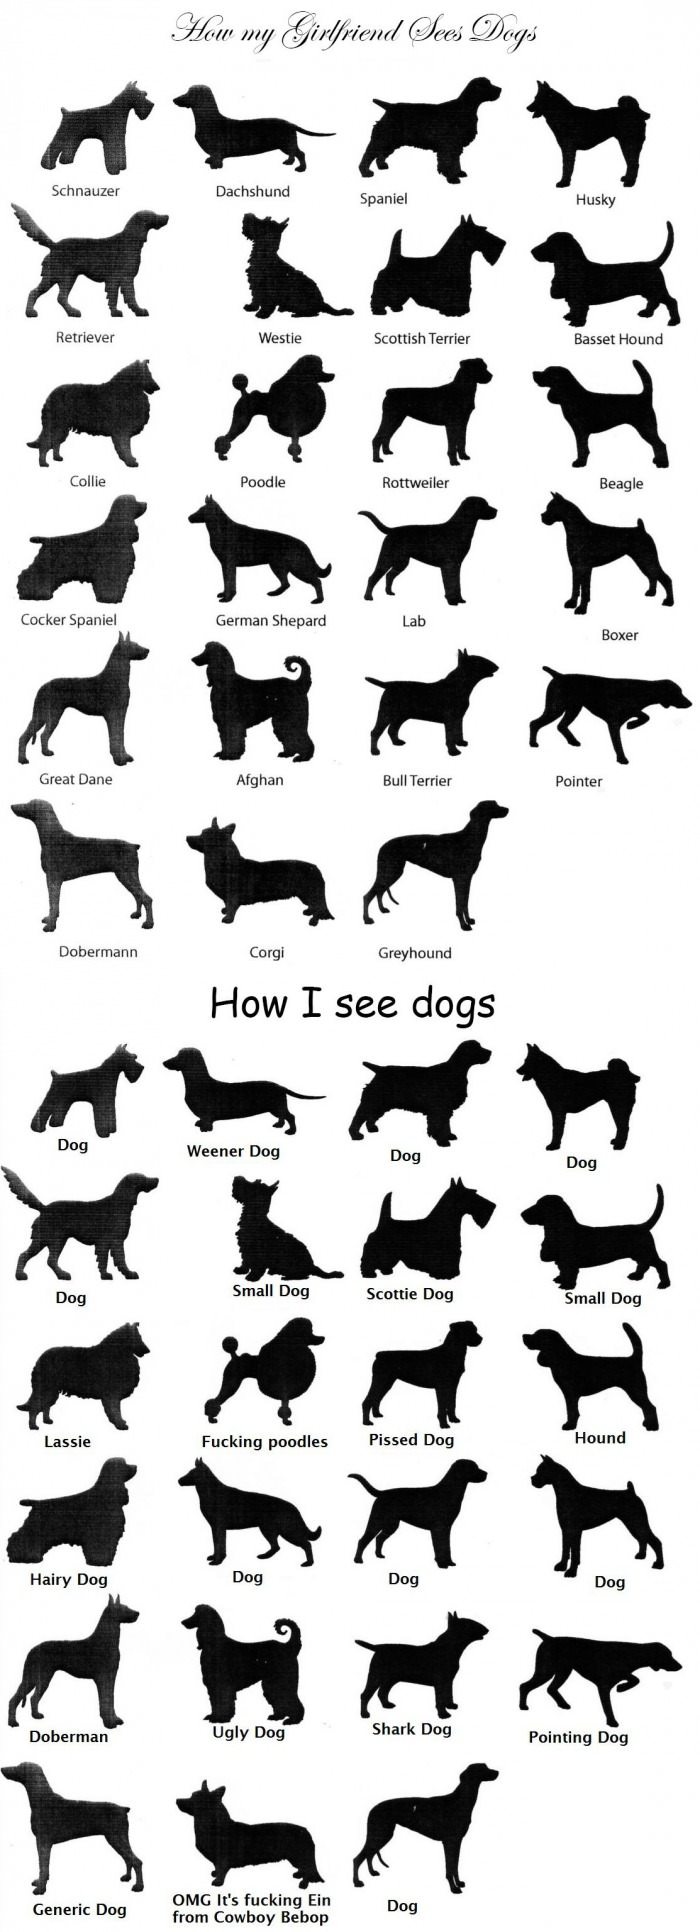 how my girlfriend sees dogs, how i see dogs